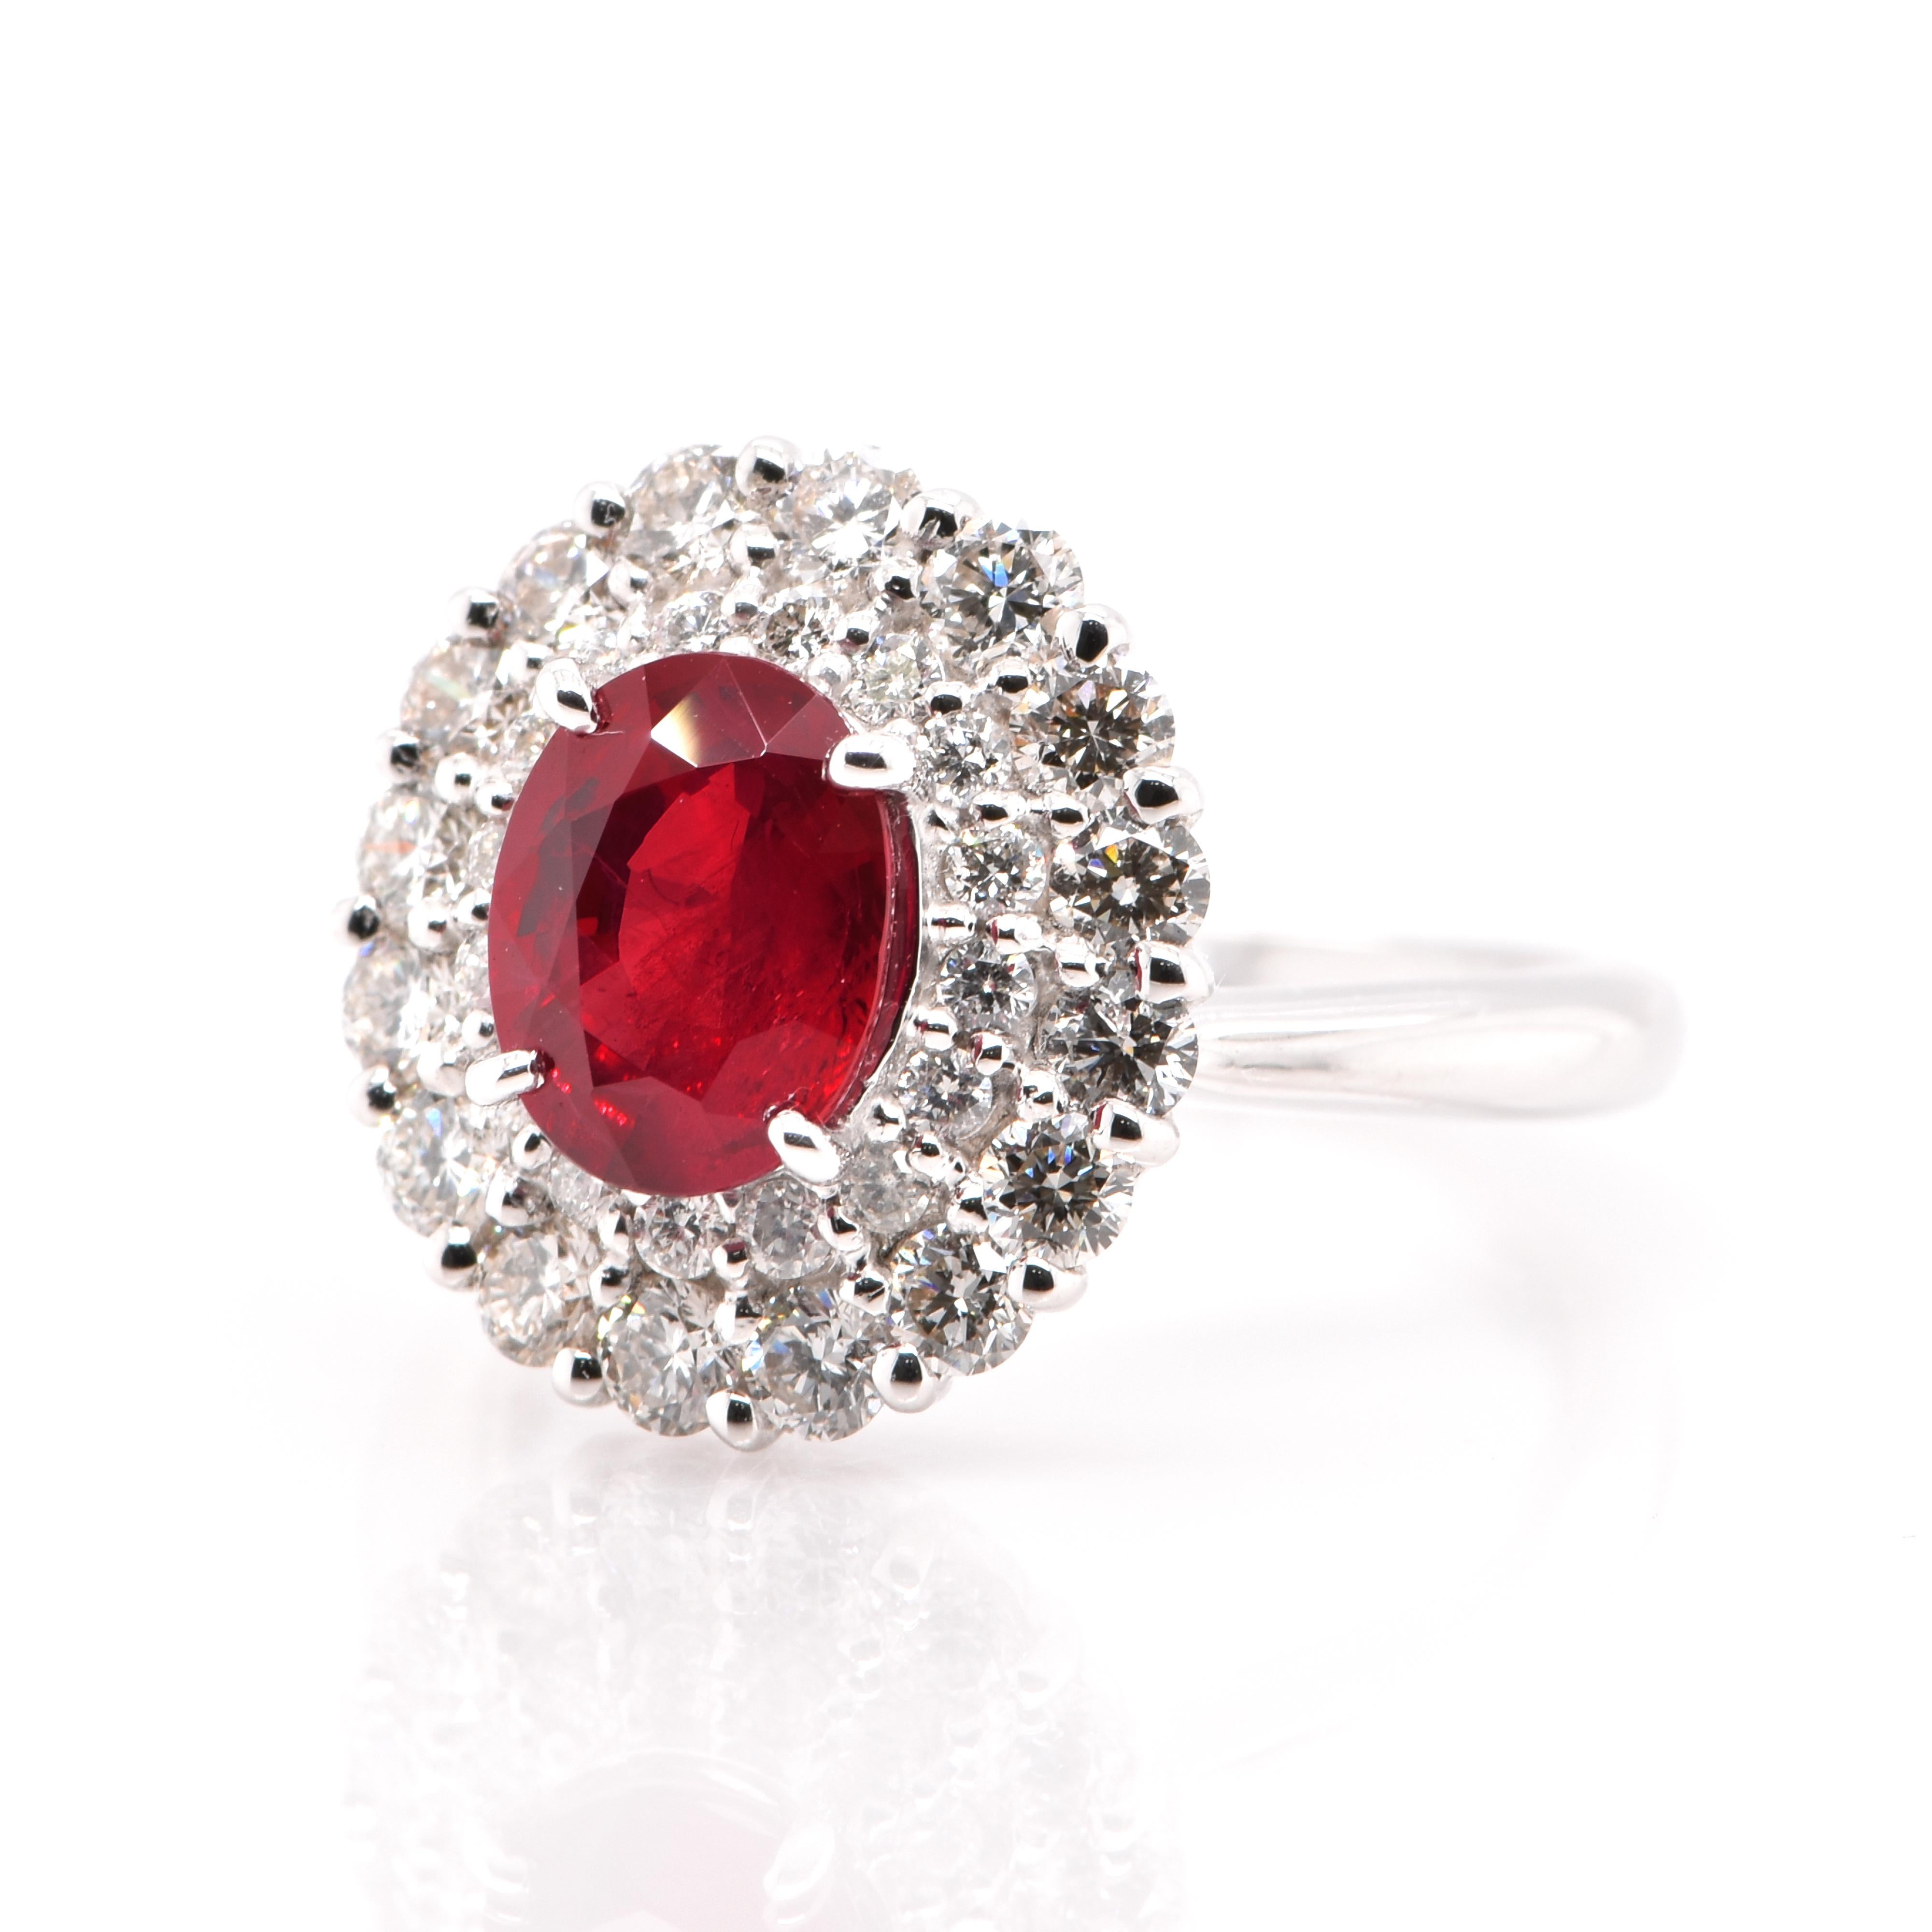 A stunning Ring featuring a GIA Certified, 2.20 Carat, Natural, Pigeon's Blood, Burmese Ruby and 1.24 Carats of Diamonds set in Platinum. Rubies are referred to as 